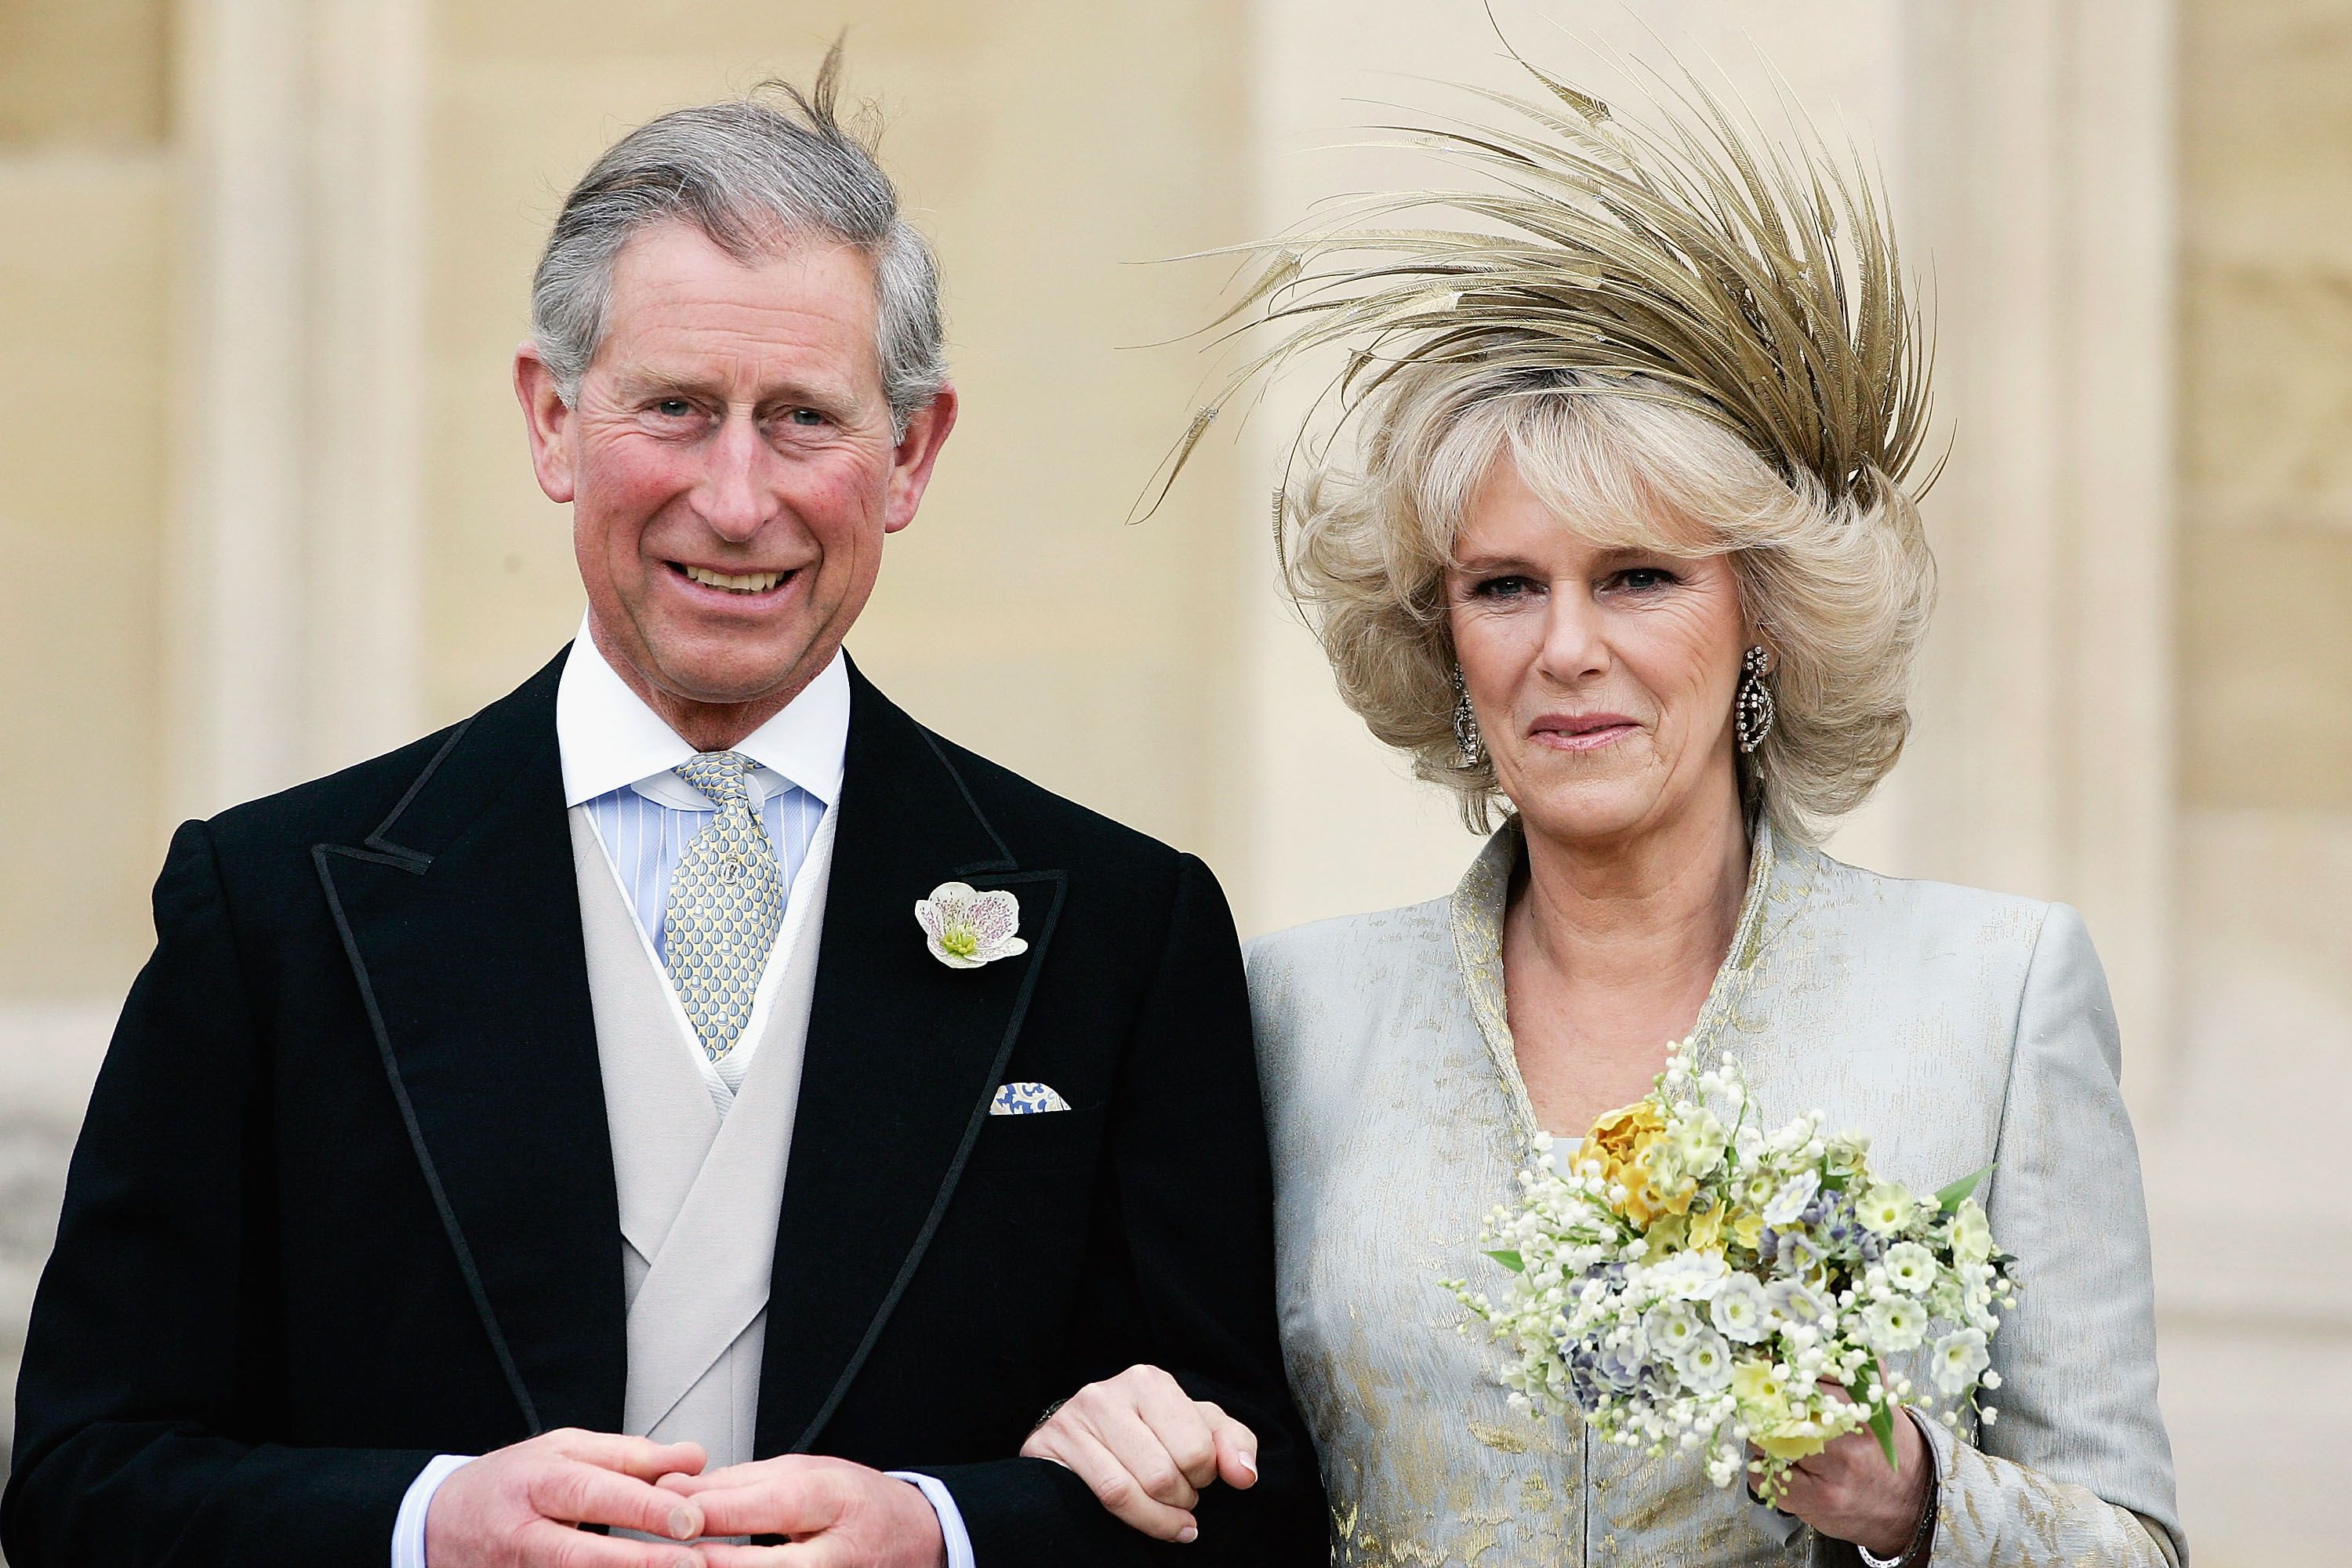 Prince Charles and Duchess Camilla after the Service of Prayer and Dedication blessing of their marriage at Windsor Castle on April 9, 2005, in Berkshire, England. | Source: Tim Graham Photo Library/Getty Images